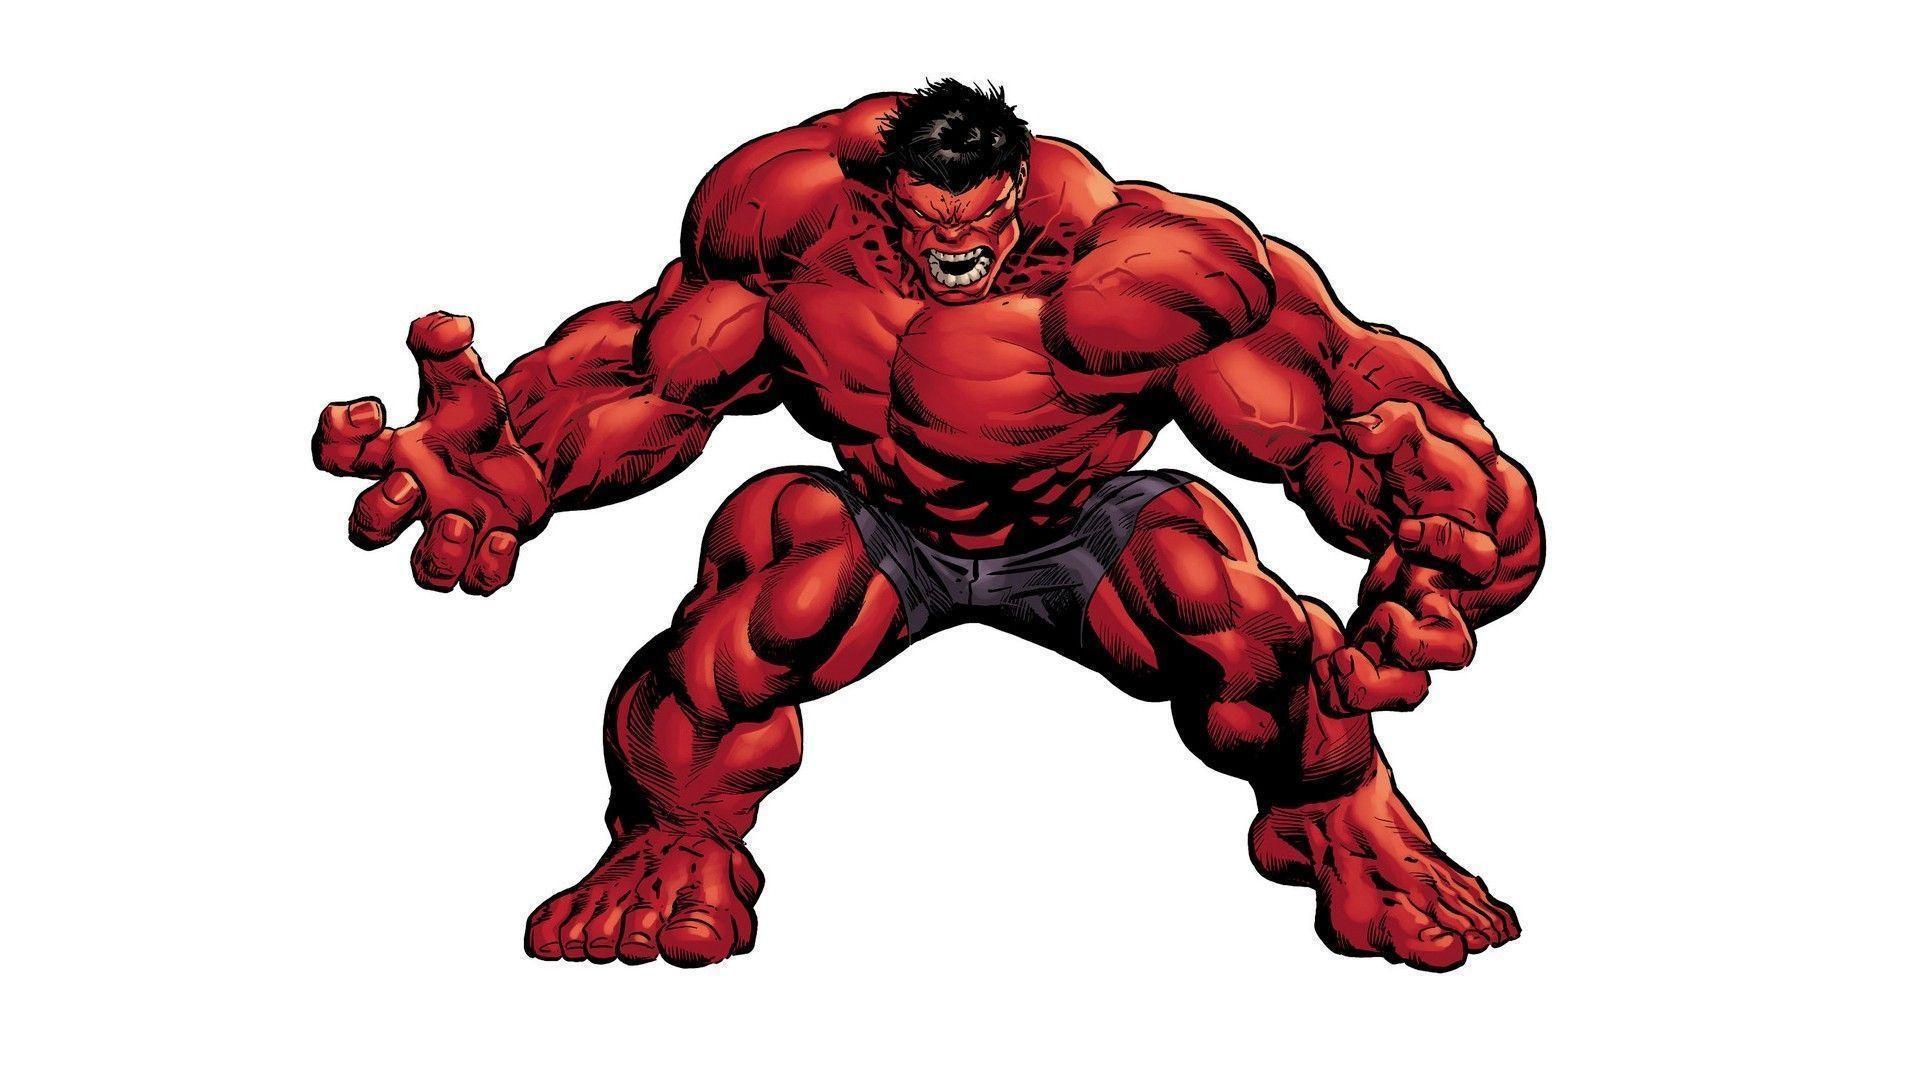 Red hulk Wallpaper with white backgrounds Stock Free Wallpaper